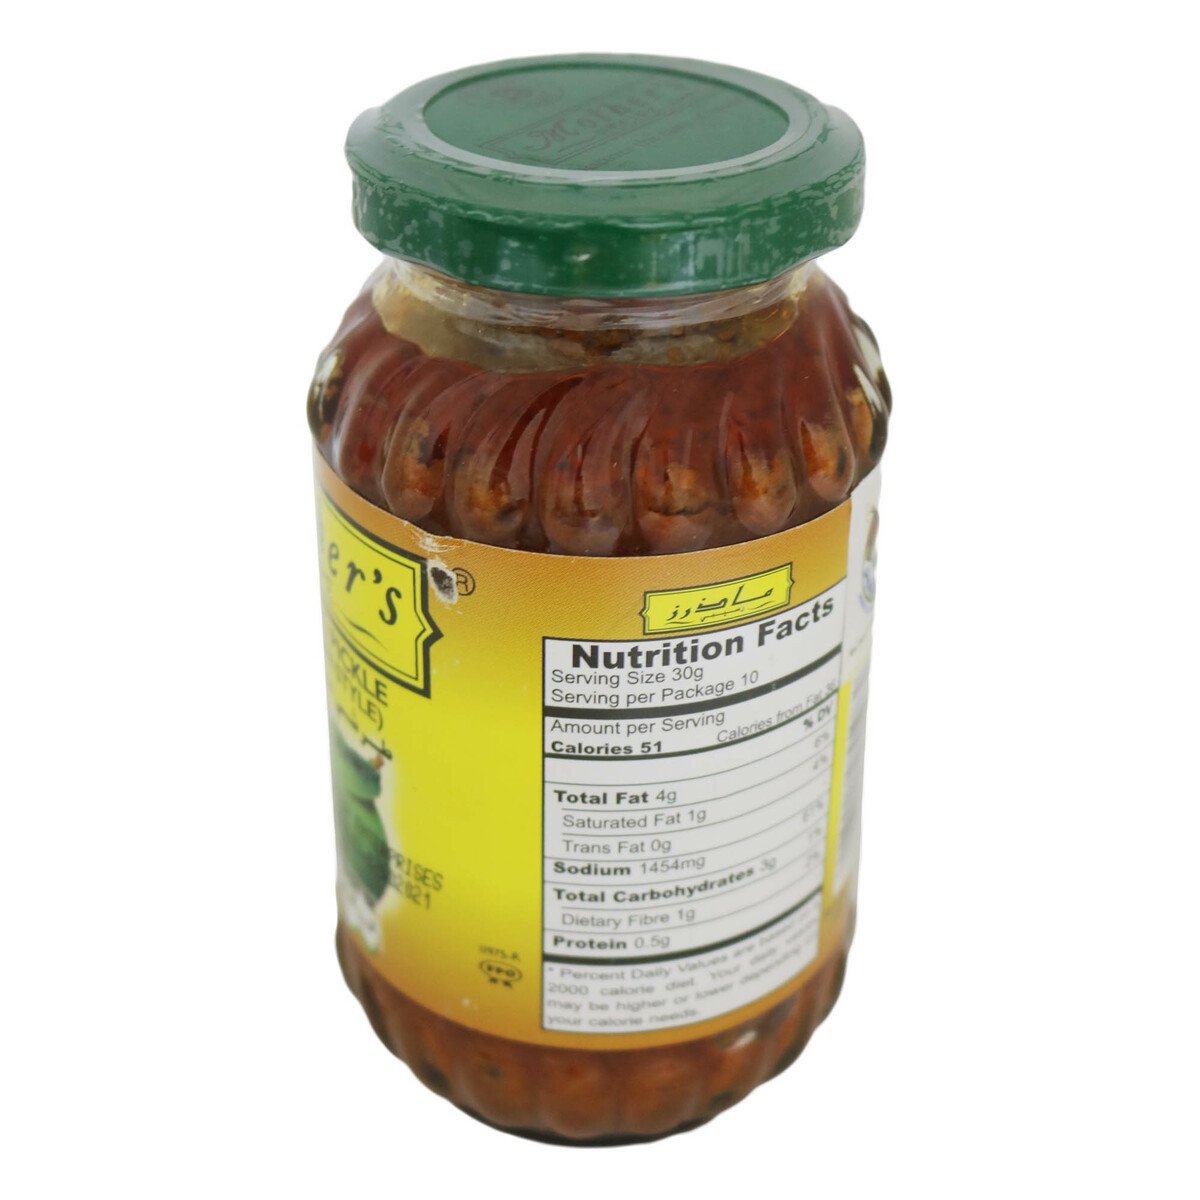 Mothers Cut Mango Pickle (South Indian Style) 300g